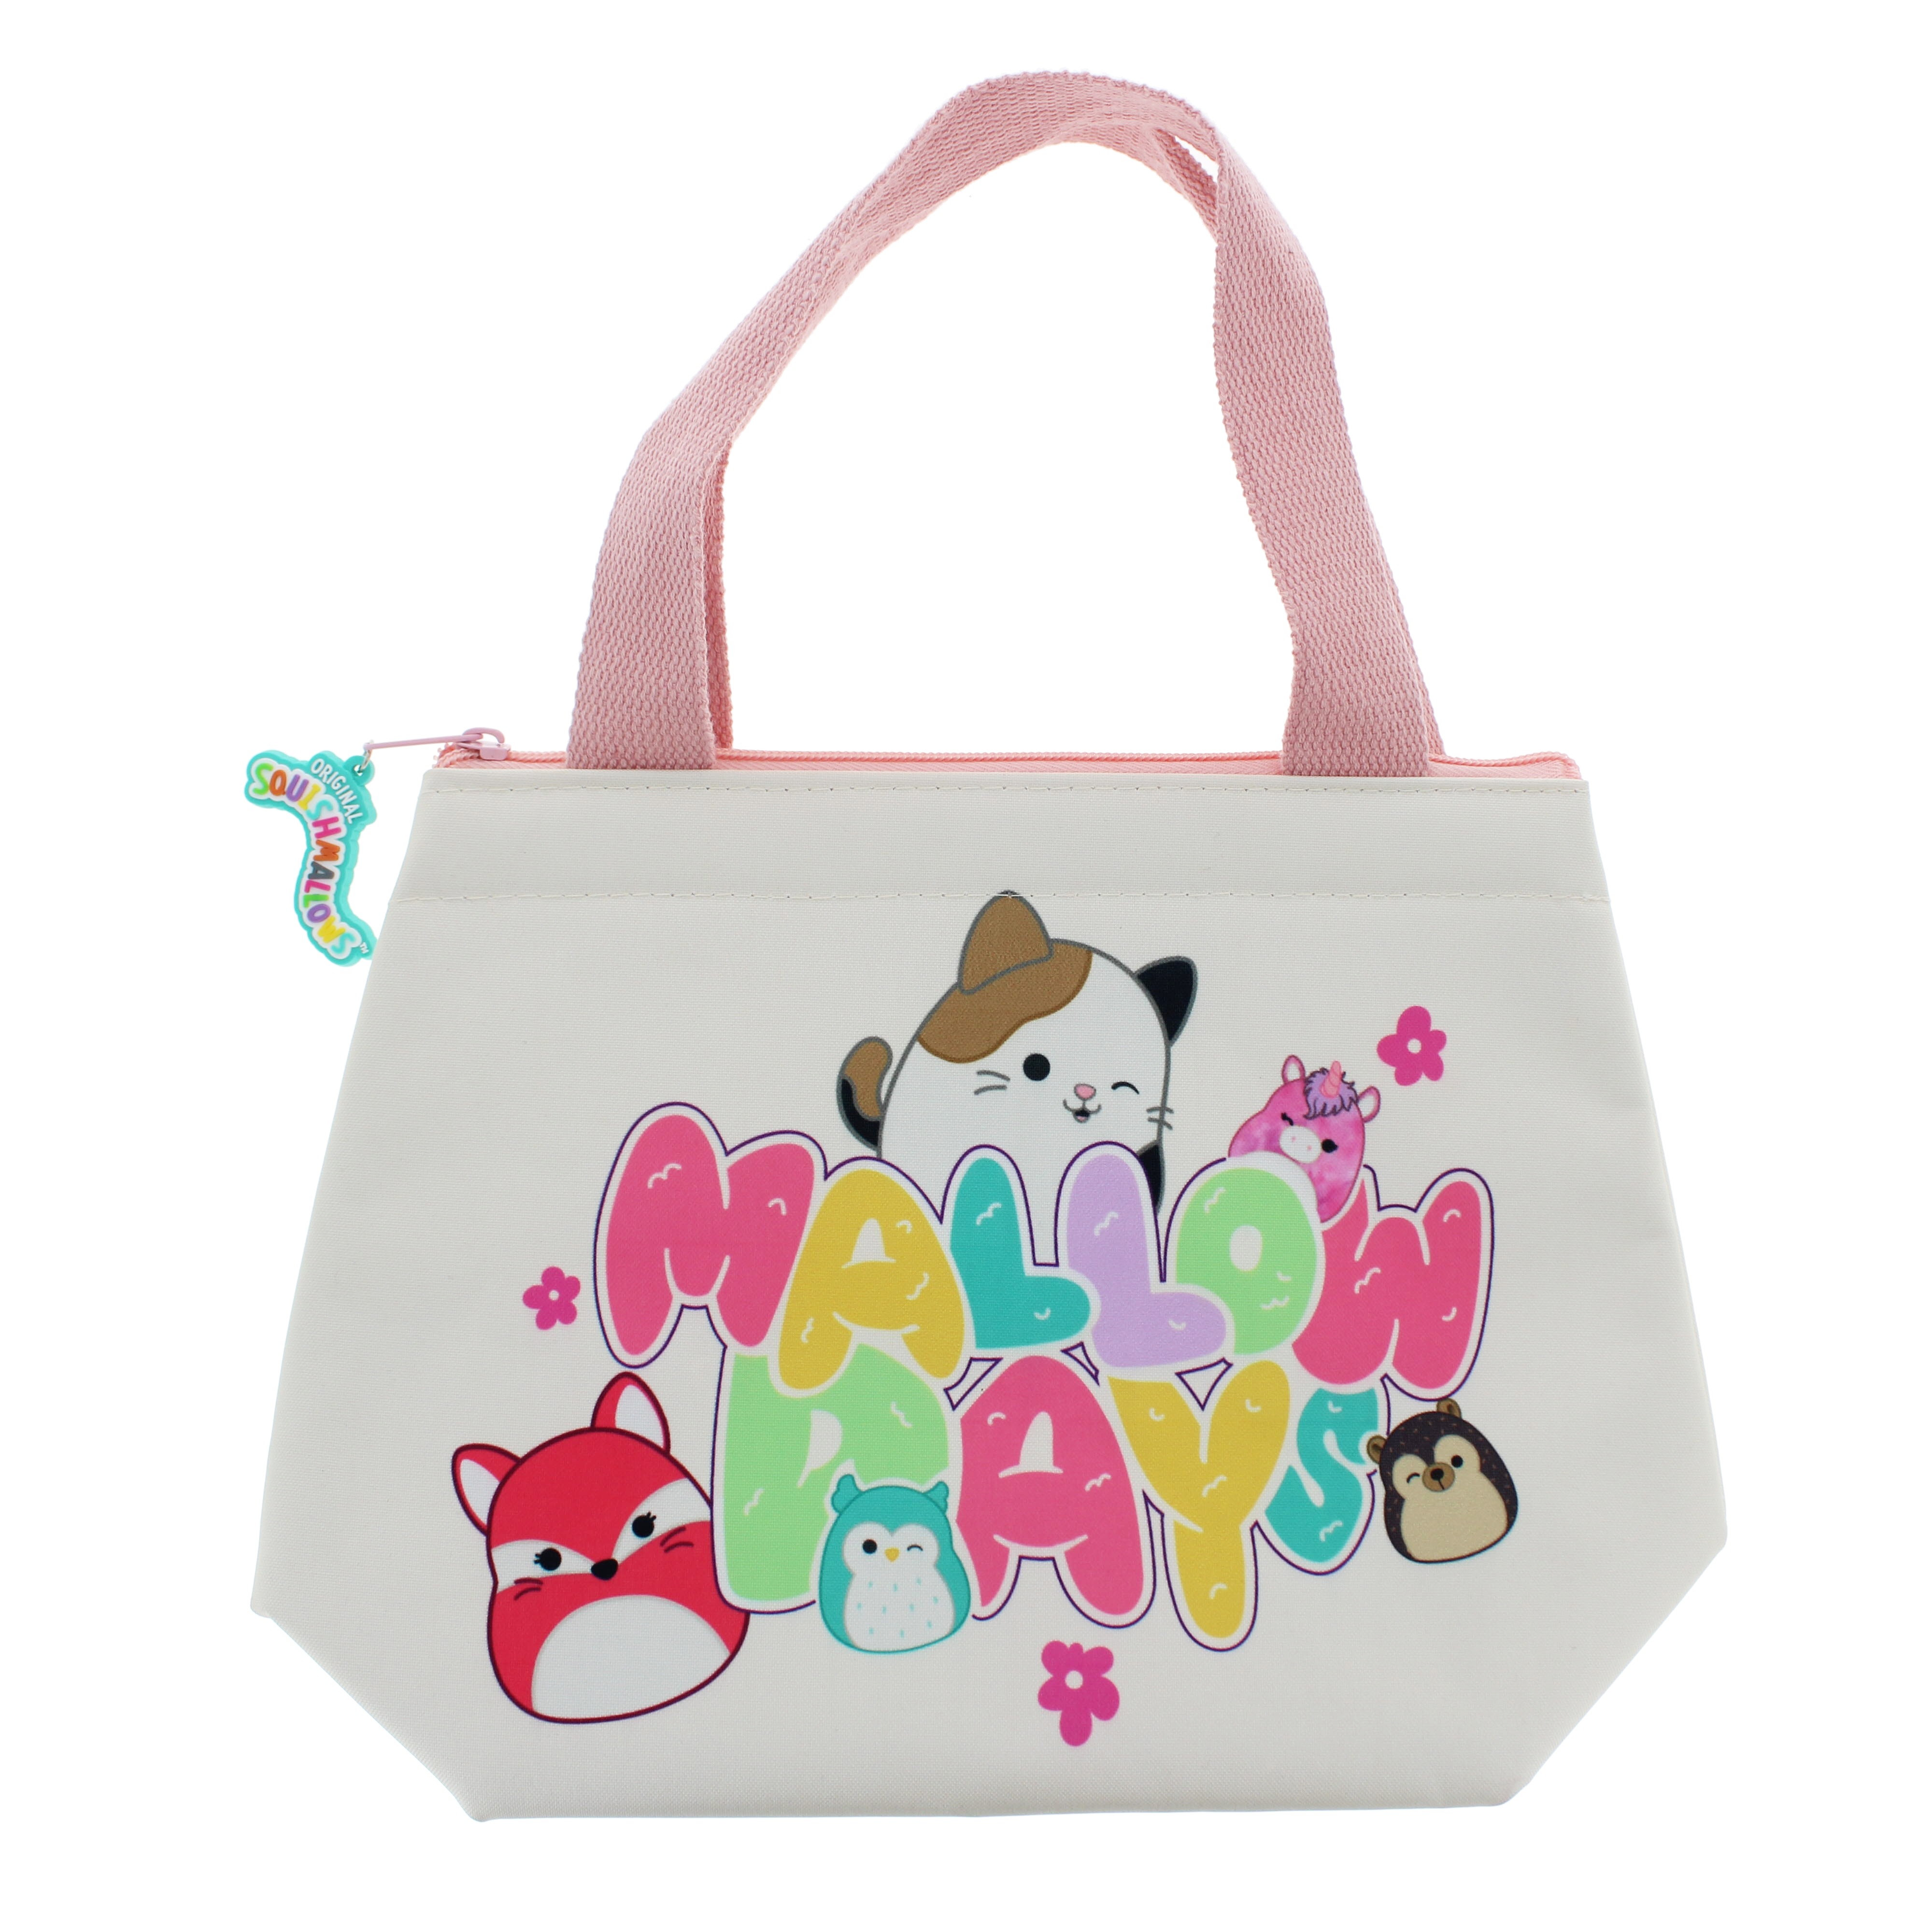 Squishmallows Lunch Bag